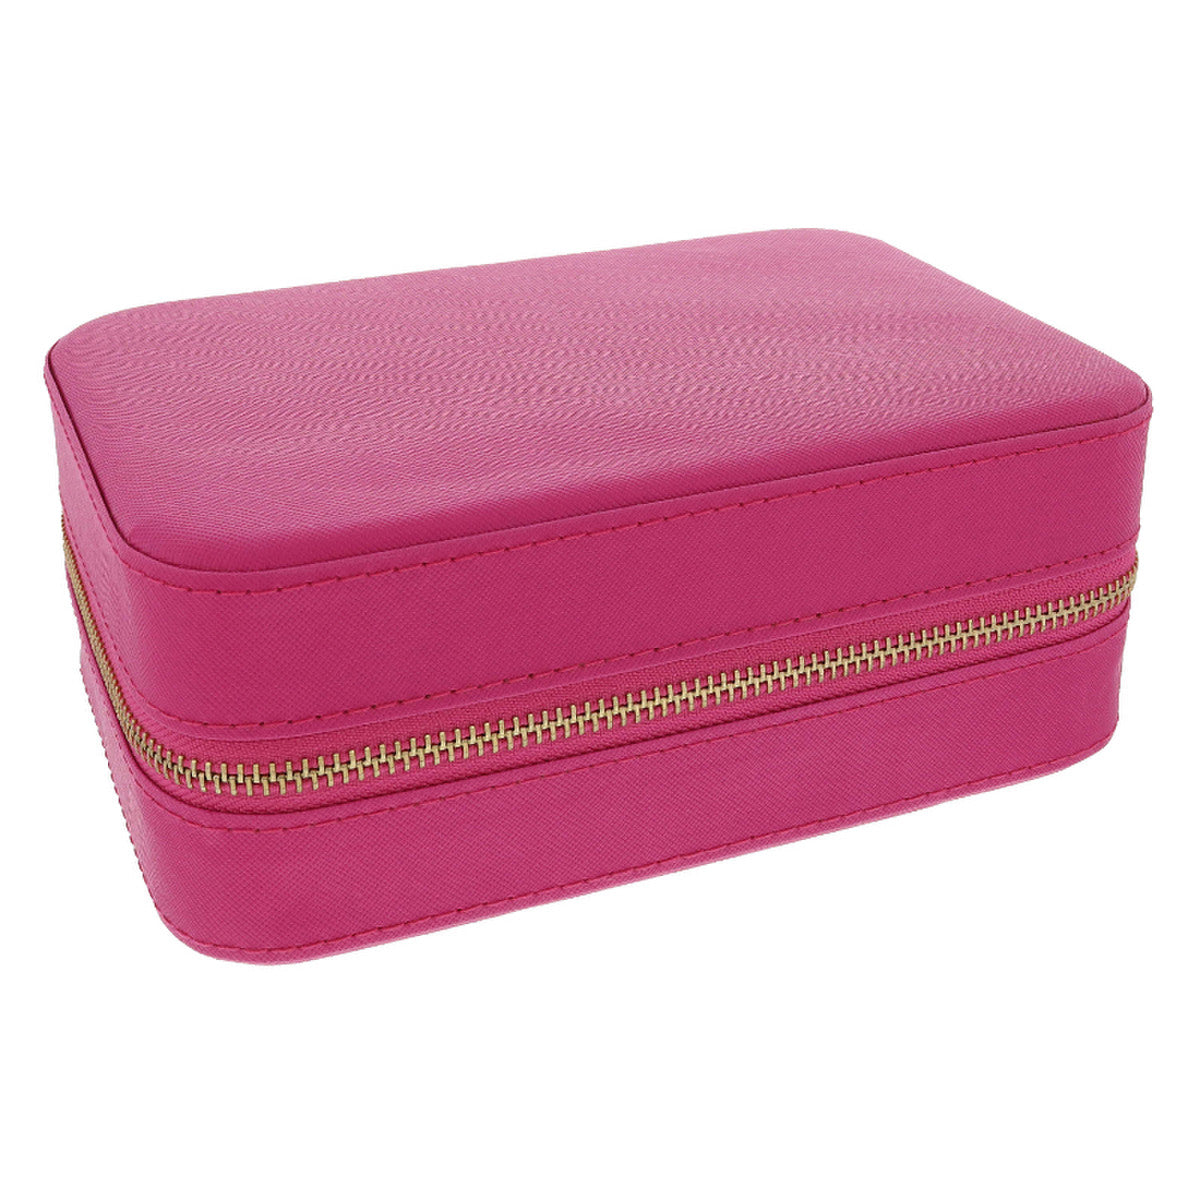 Hot Pink Jewelry Case, Saffiano Leather